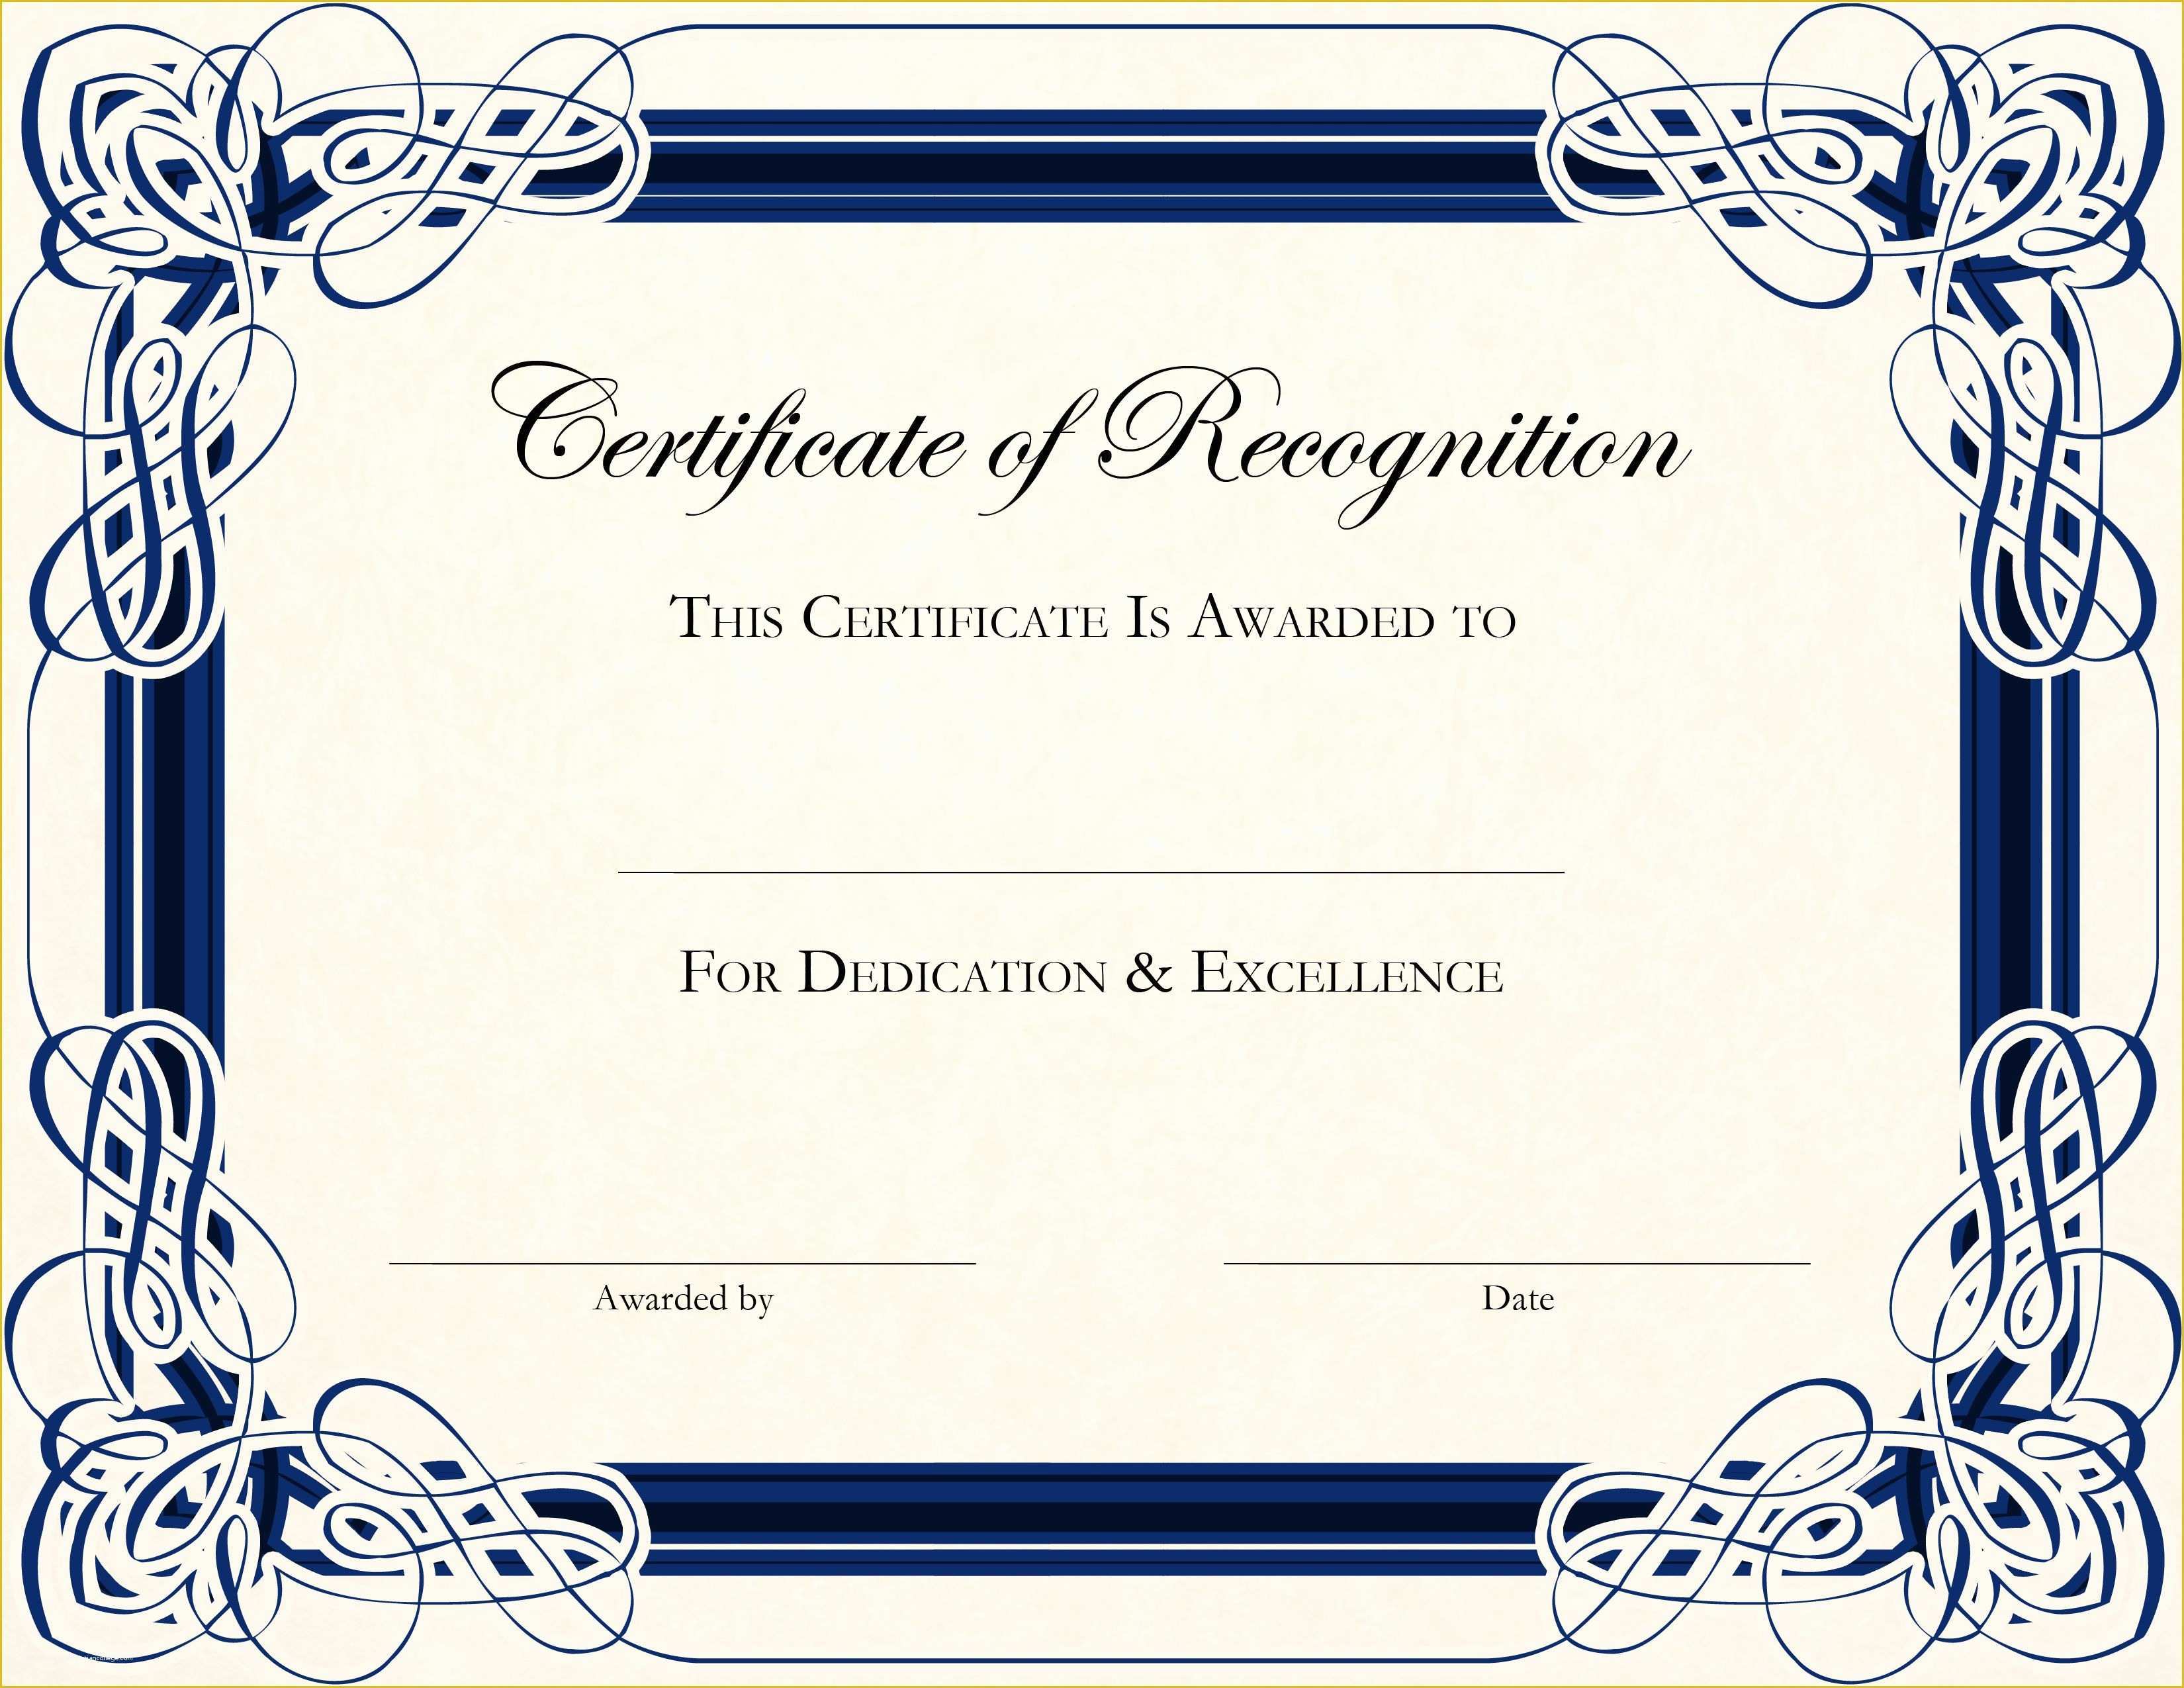 Certificate Of Recognition Template Free Of Pin by Suzanne Poliner On Lenny